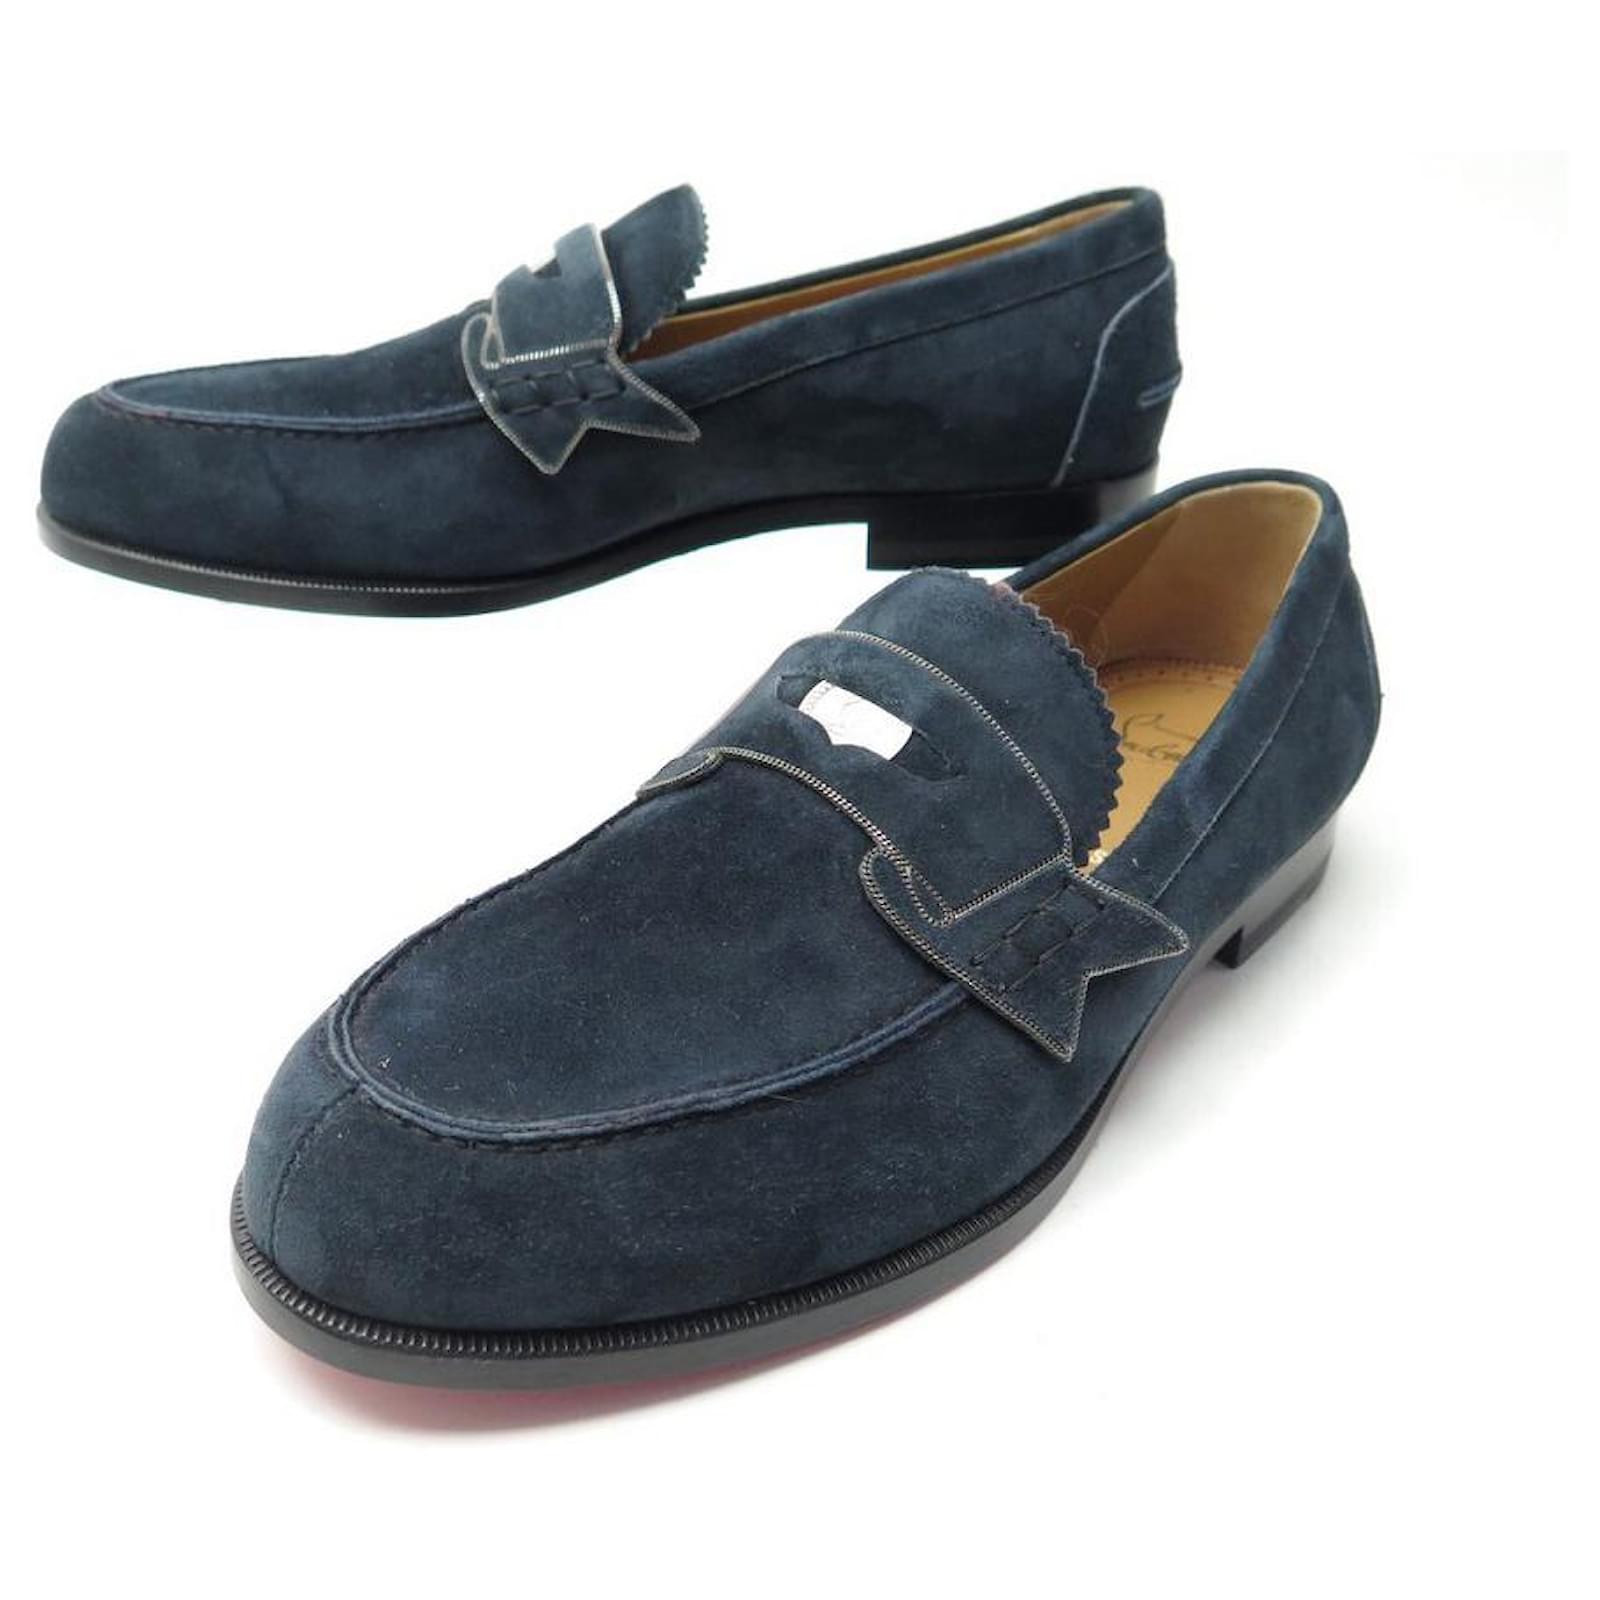 NEW CHRISTIAN LOUBOUTIN MOCCASIN SHOES 40.5 BLUE SUEDE NEW SHOES